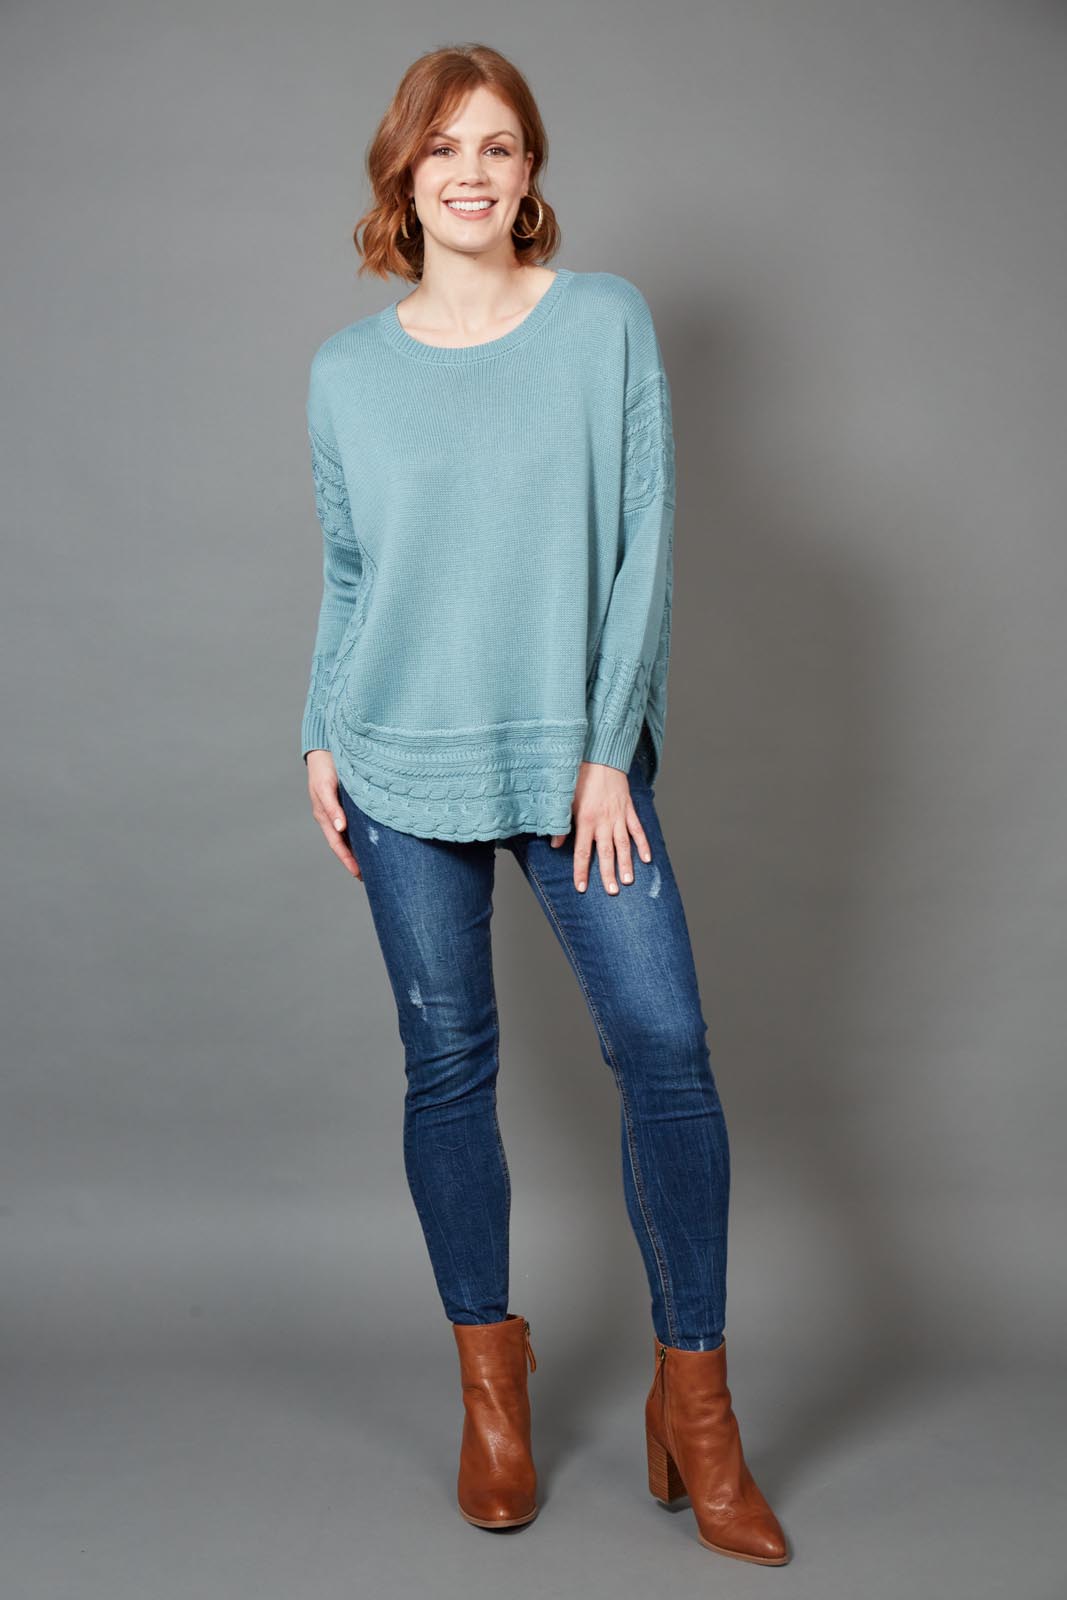 Poppy Knit - Teal - eb&ive Clothing - Knit Jumper One Size